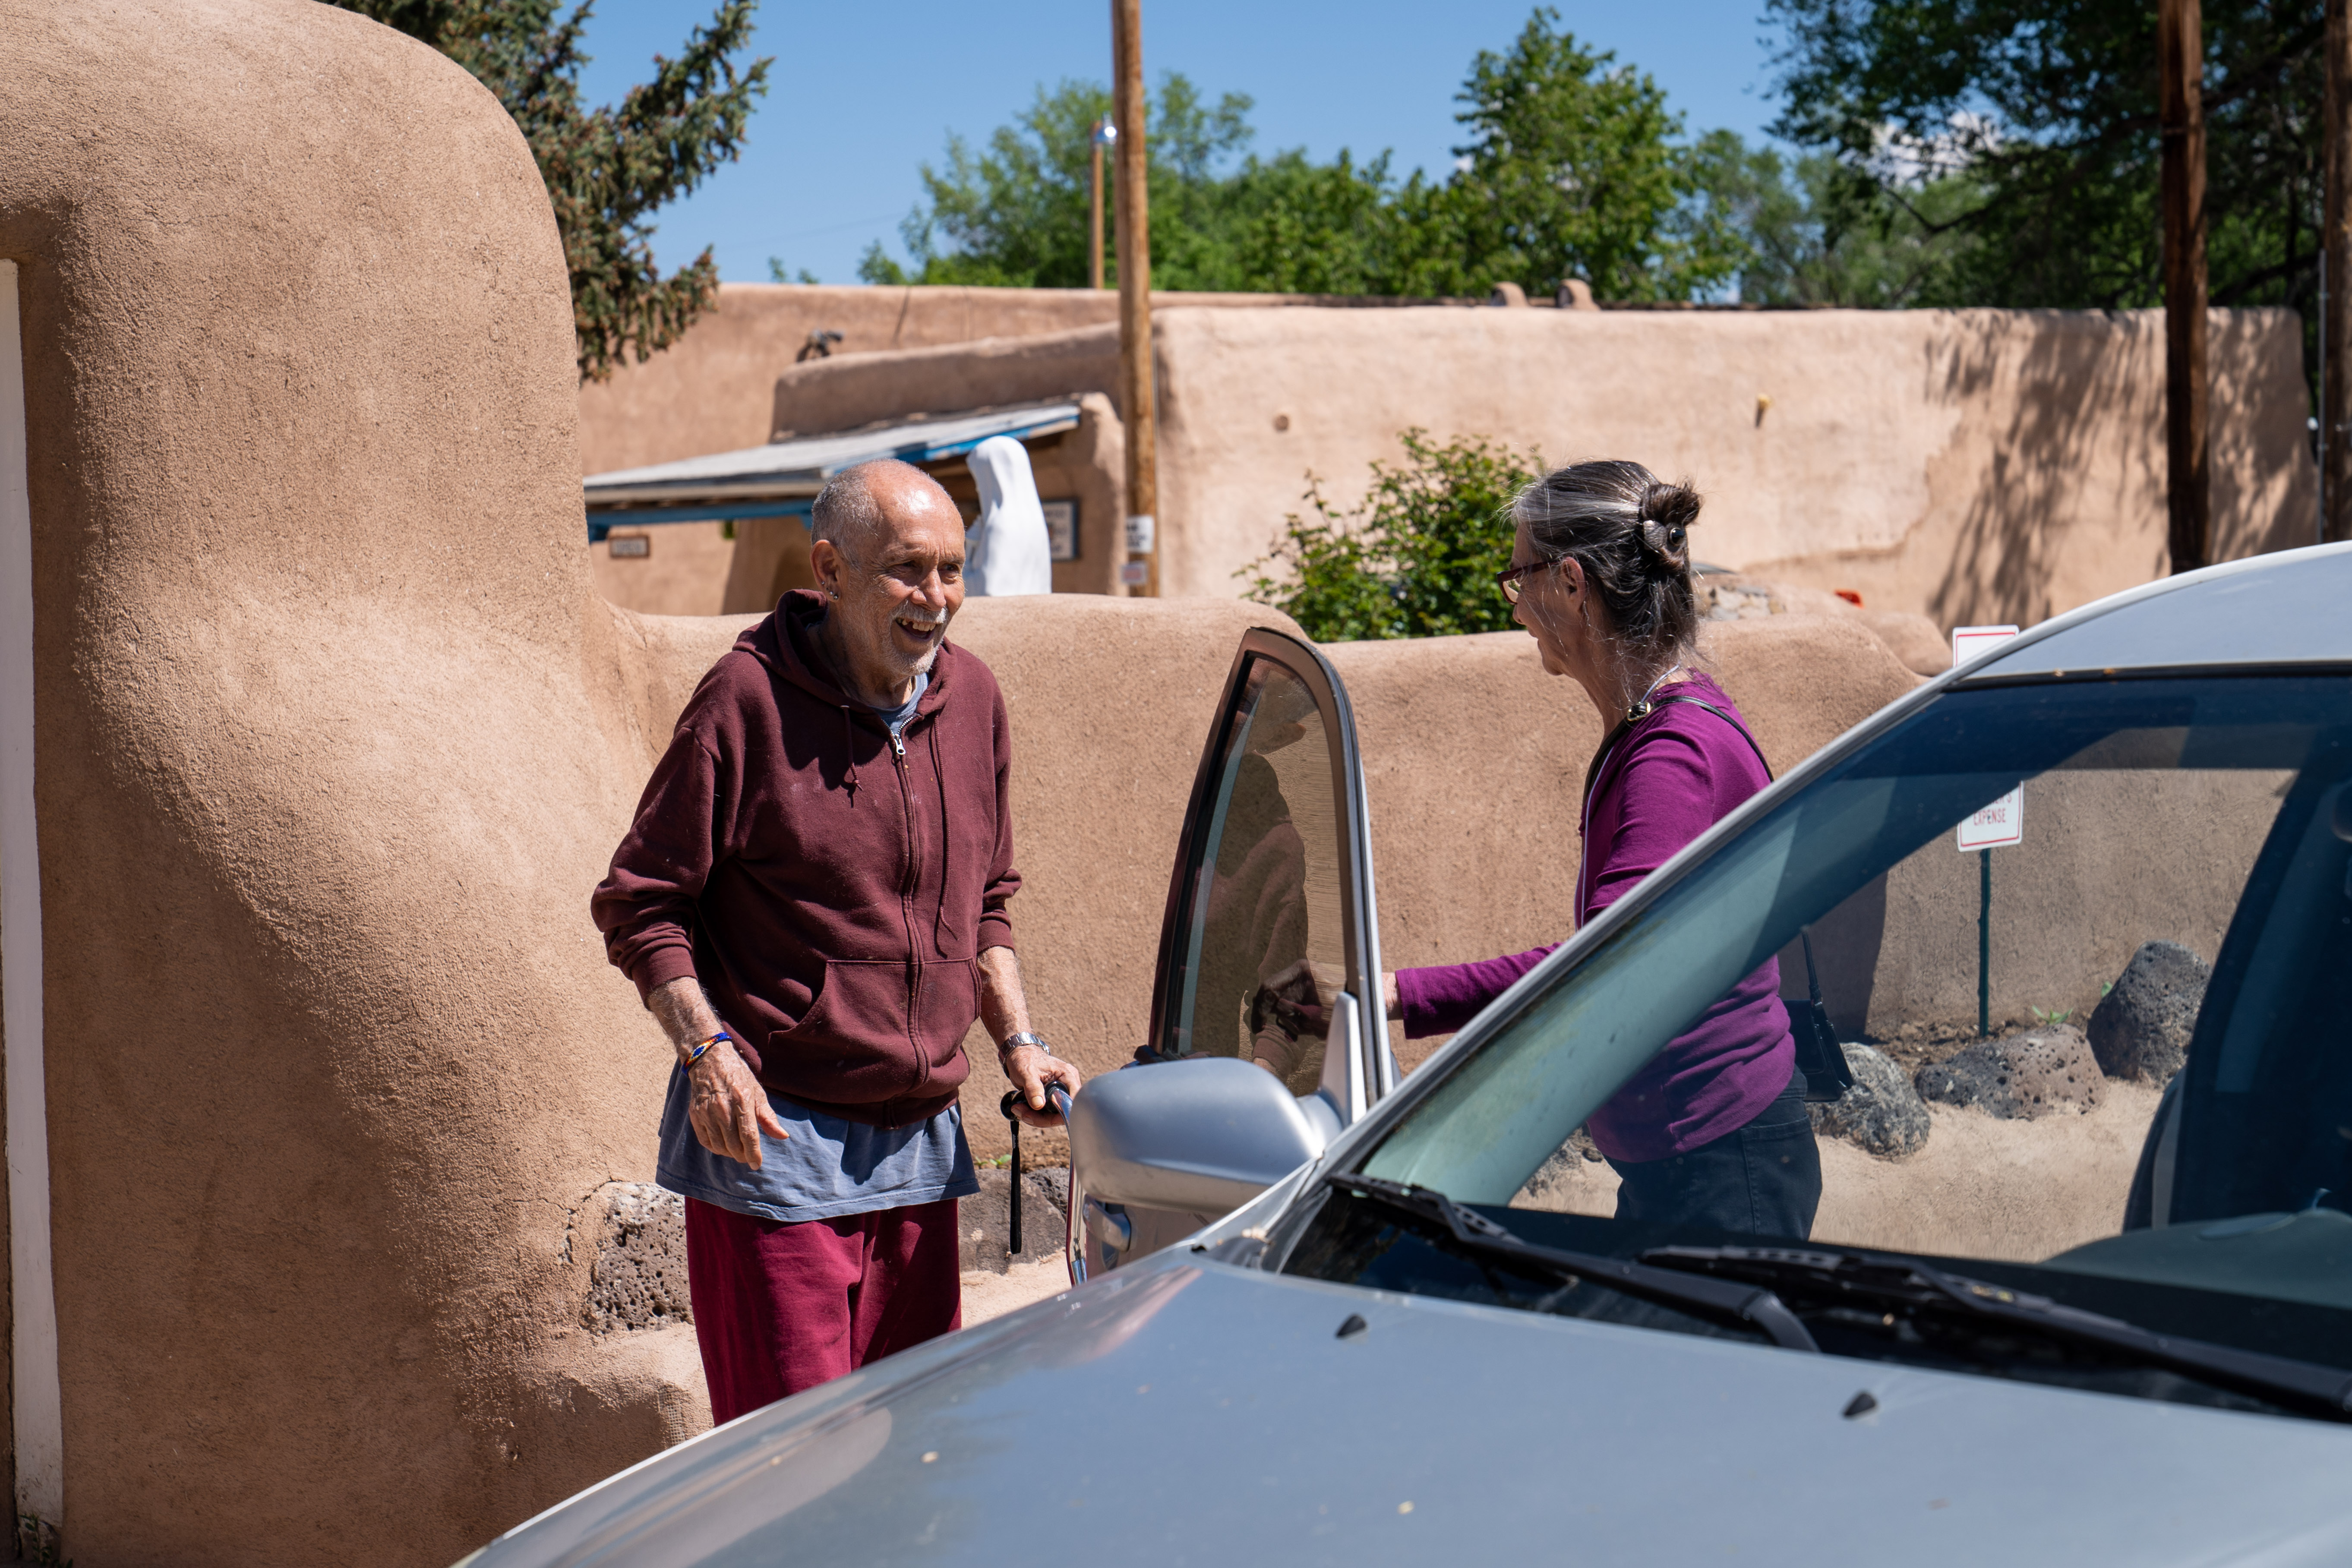 Volunteer driver helping older man approaching car with pueblos style building in background